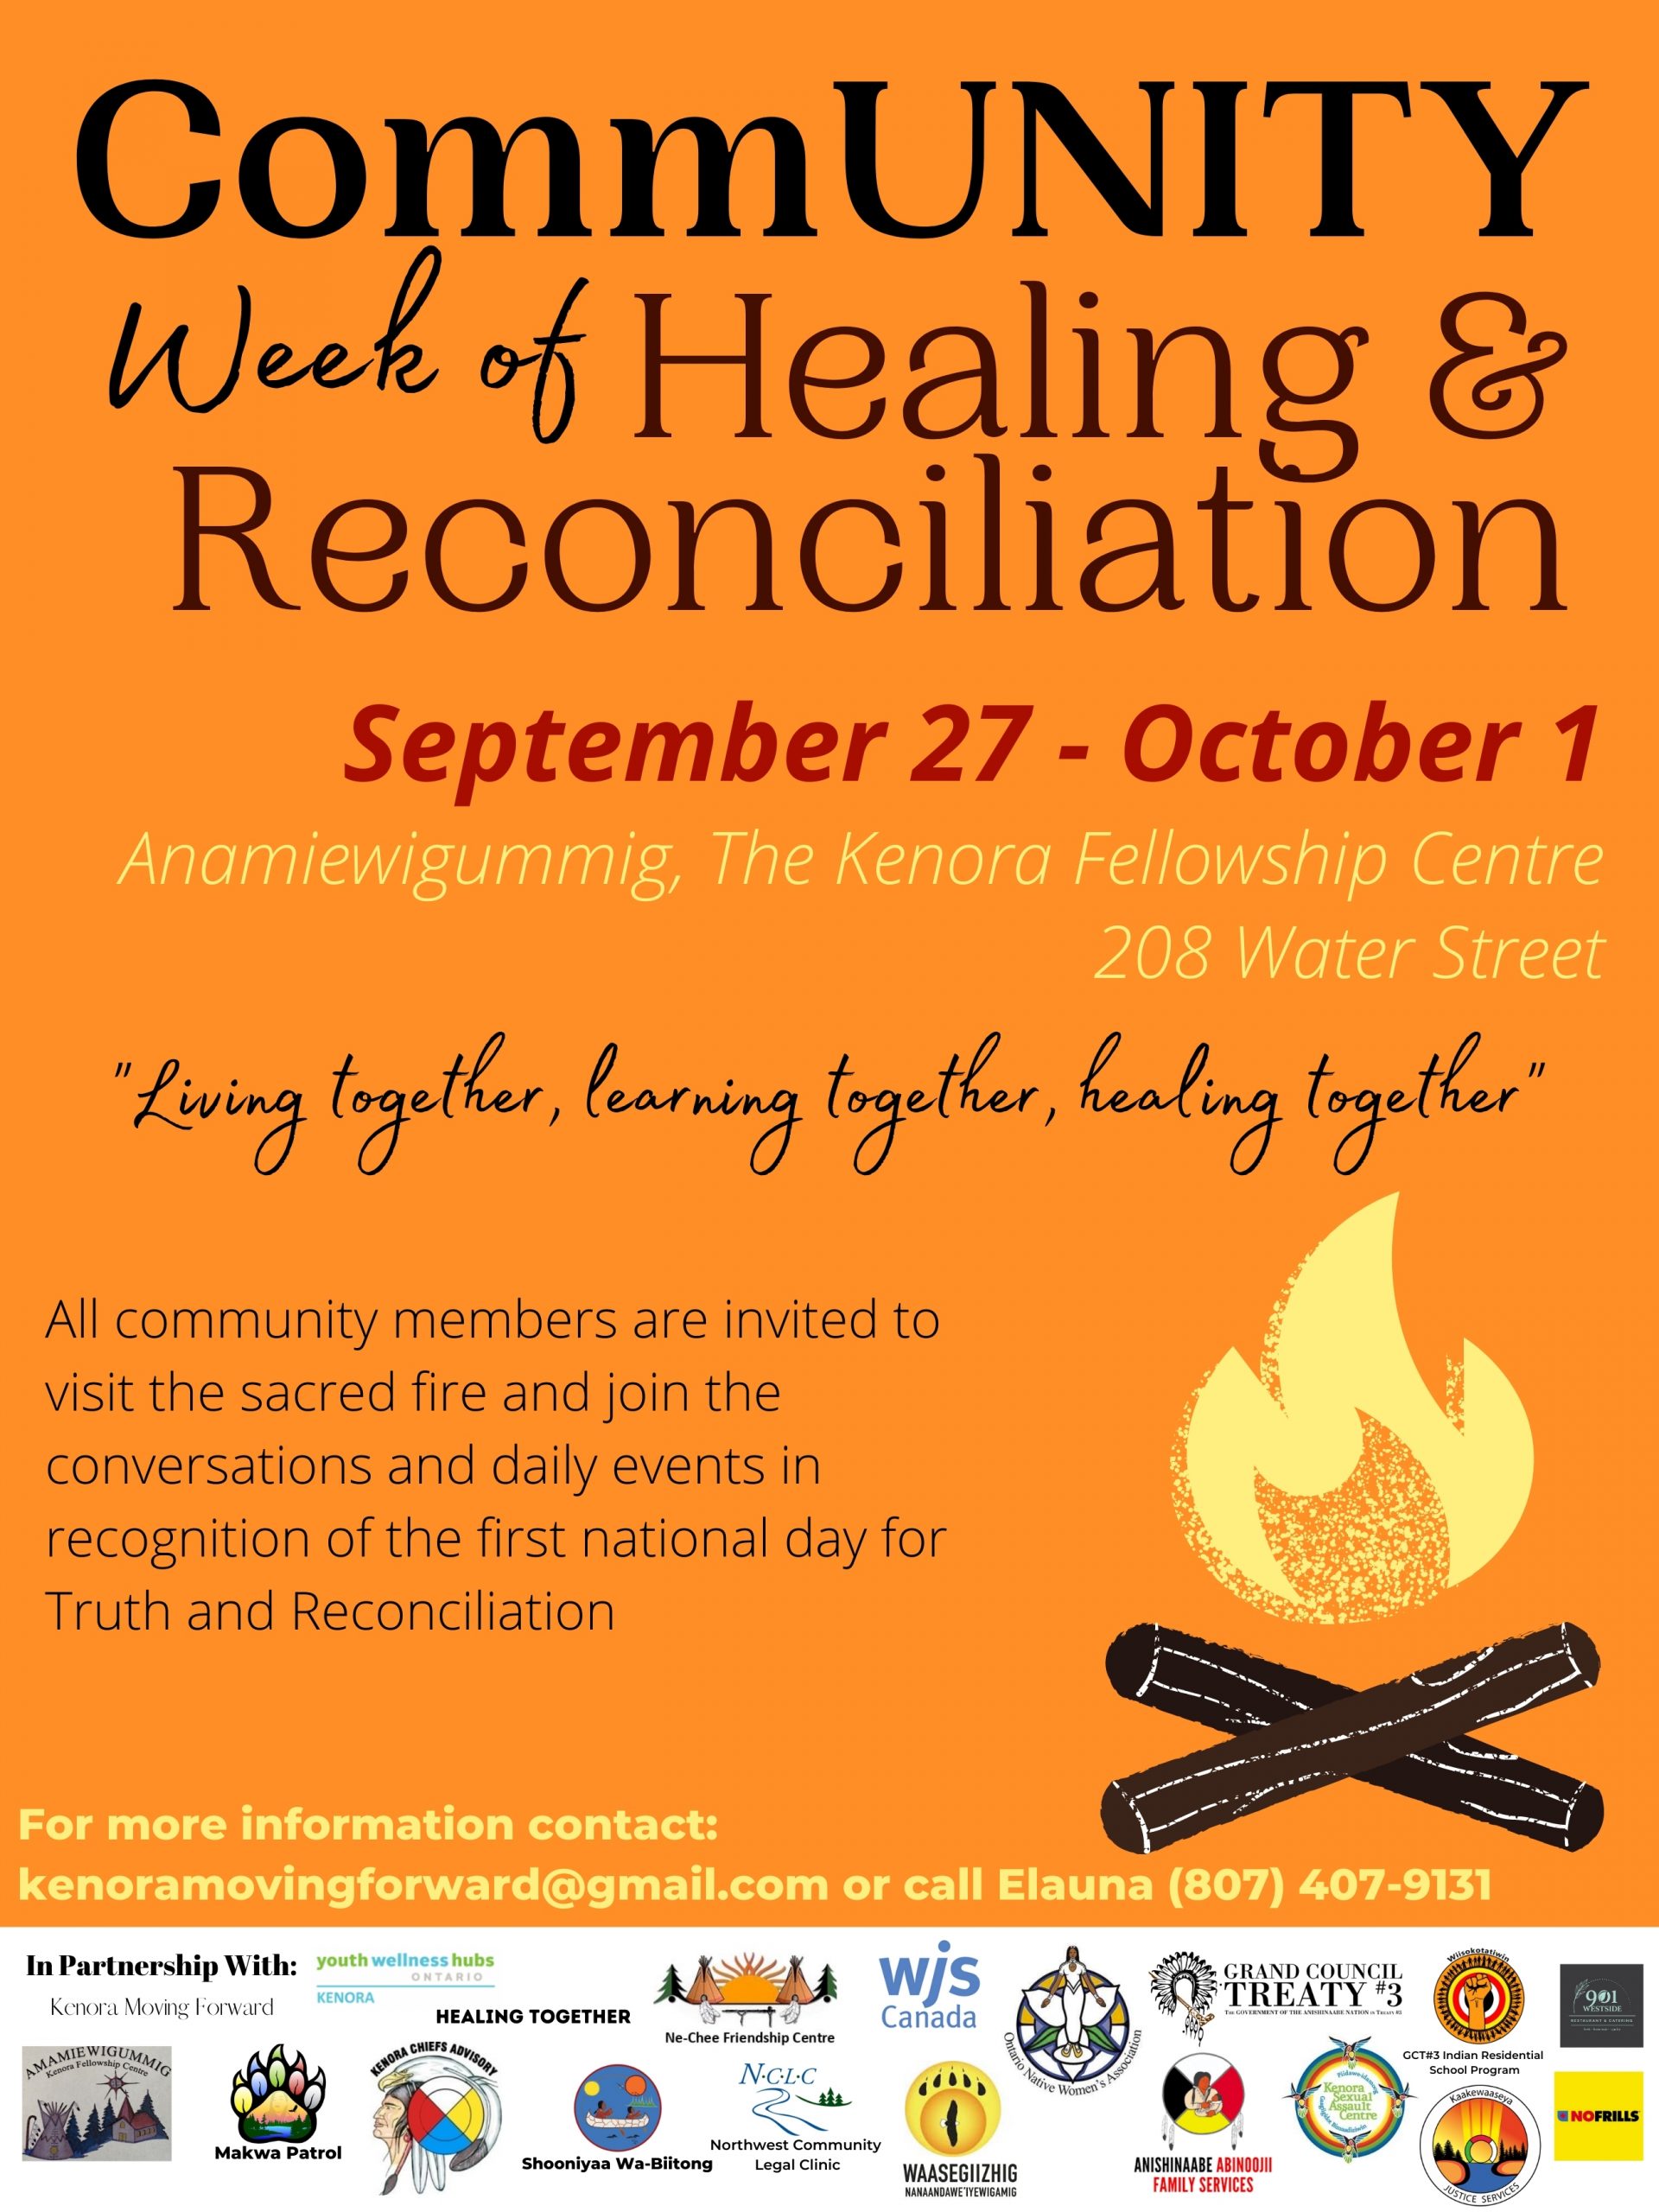 Community Week of Healing & Reconciliation